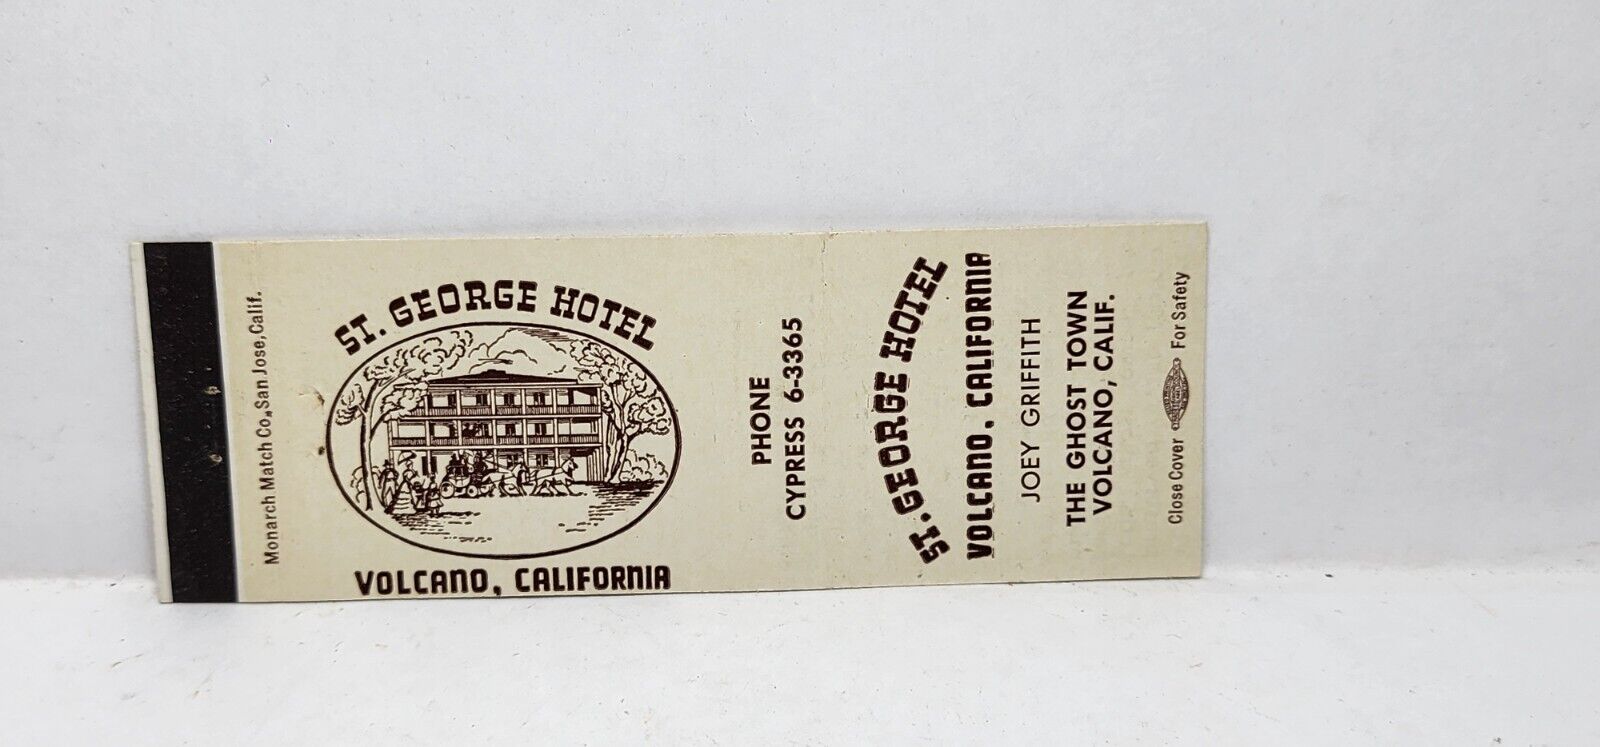 Vintage Matchbook Cover - ST. GEORGE HOTEL - Volcano, California CA Ghost Town